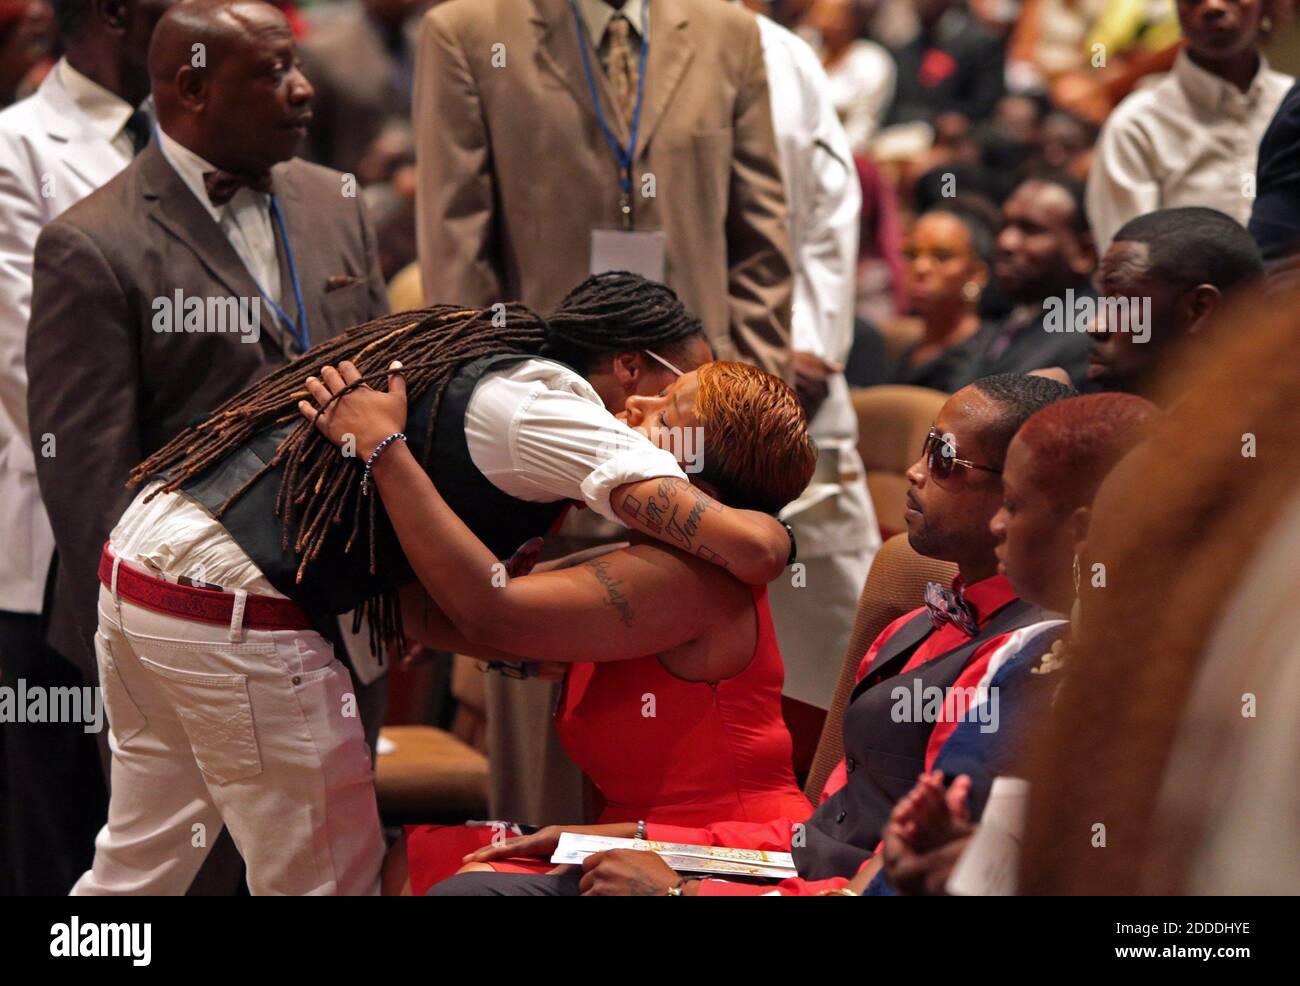 NO FILM, NO VIDEO, NO TV, NO DOCUMENTARY - Lesley McSpadden is comforted during the funeral services for her son Michael Brown on Monday, August 25, 2014, at Friendly Temple Missionary Baptist Church in St. Louis, MO, USA. Photo by Robert Cohen/St. Louis Post-Dispatch/MCT/ABACAPRESS.COM Stock Photo